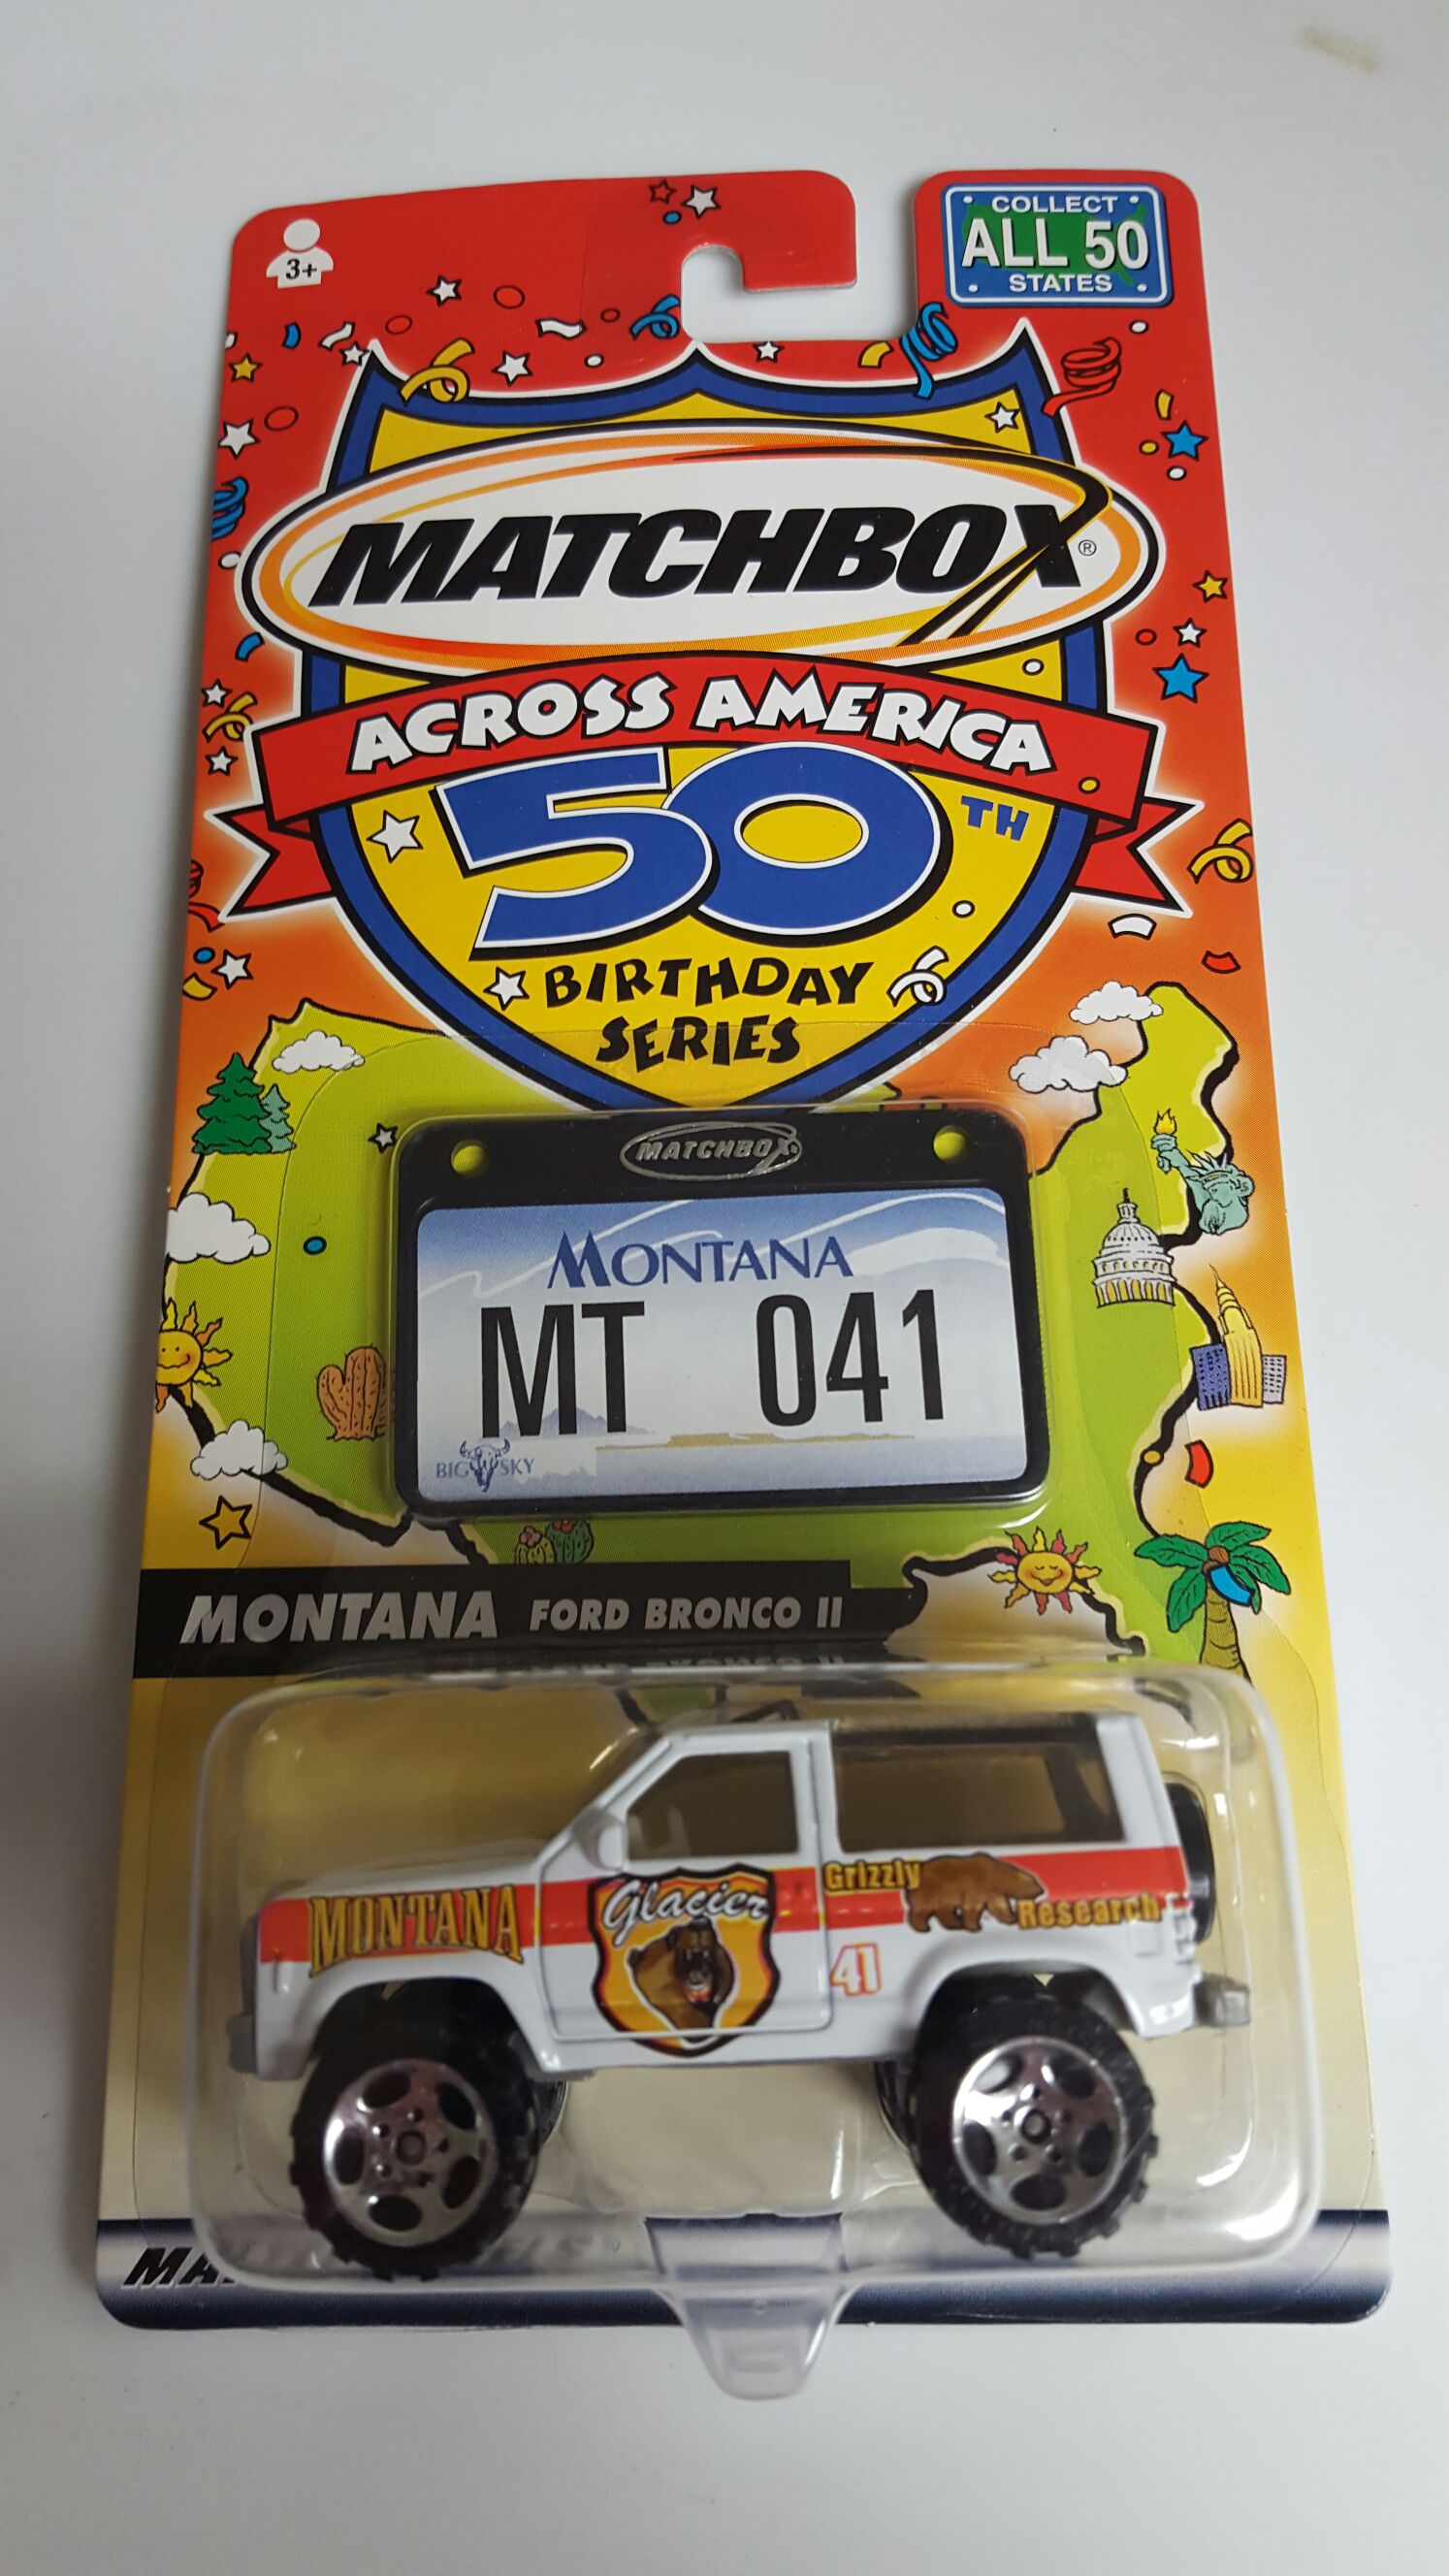 Matchbox 50 States 41  toy car collectible - Main Image 1